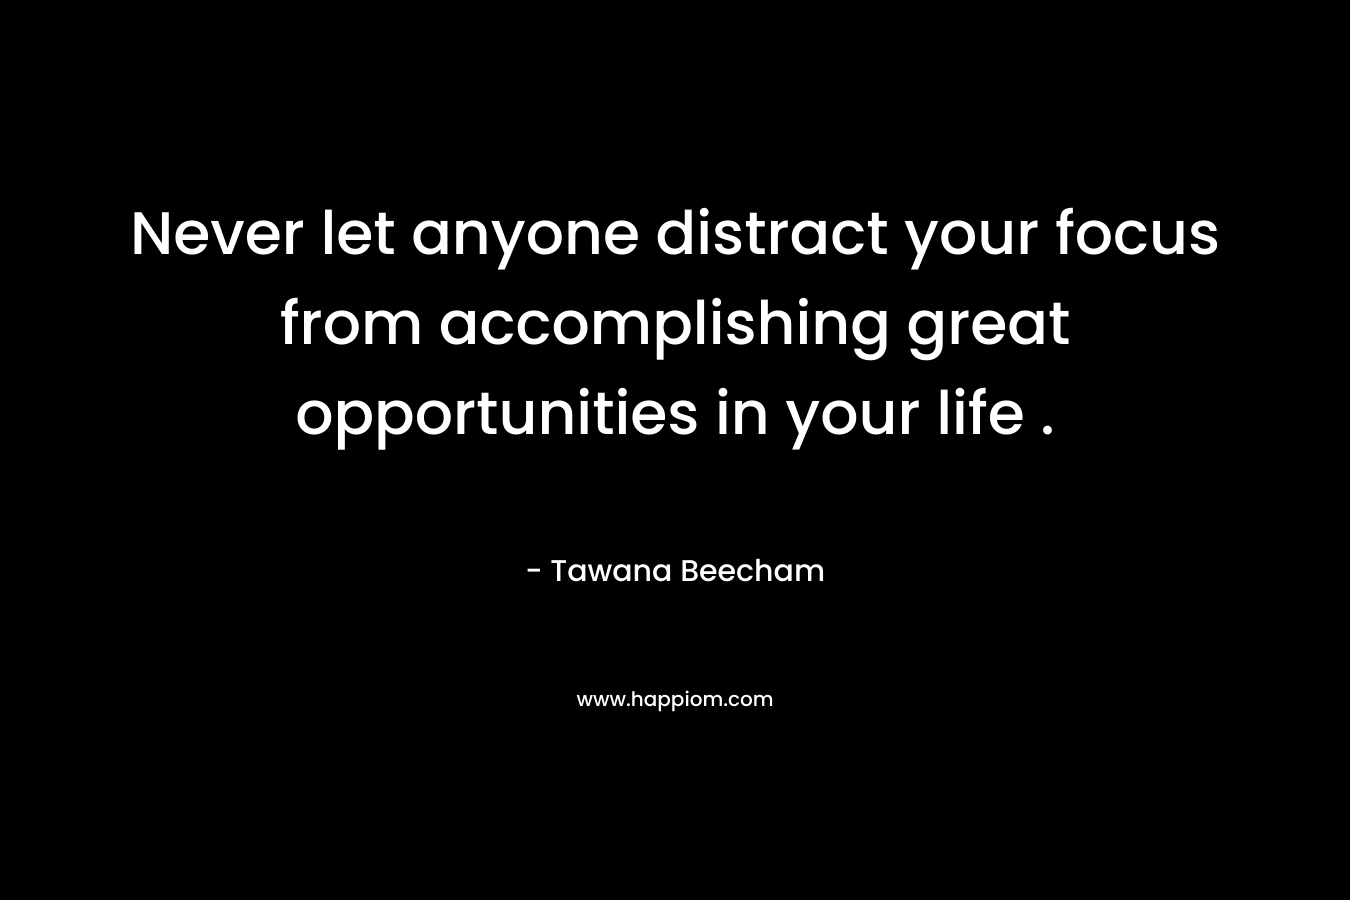 Never let anyone distract your focus from accomplishing great opportunities in your life .